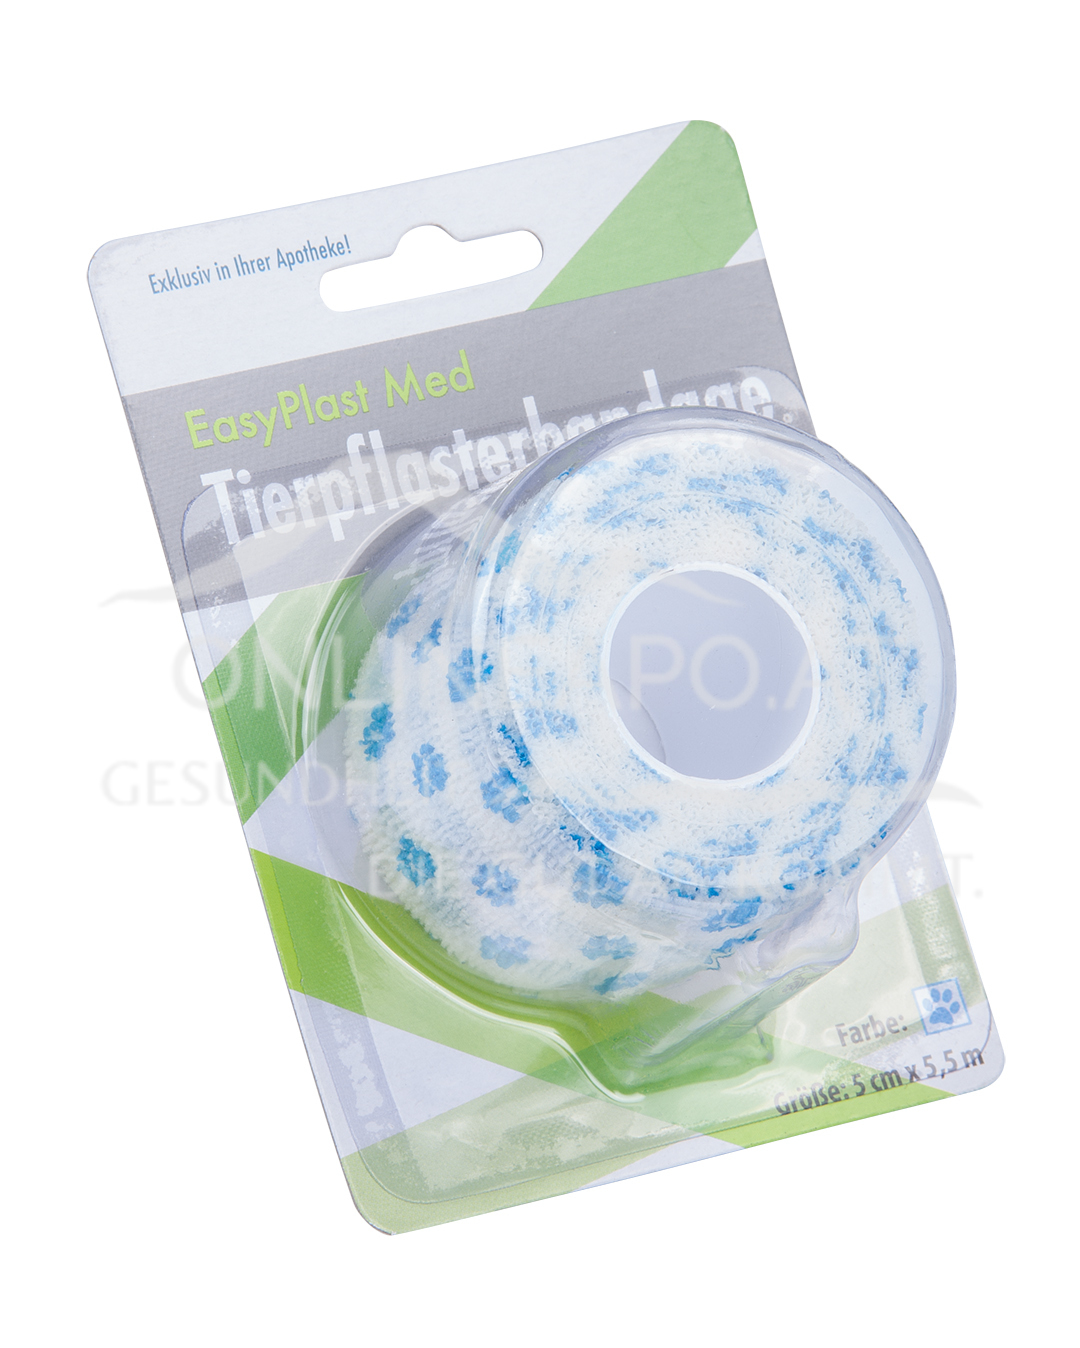 Easy Plast Med Selbsthaftendes Tierpflaster 5 cm x 5,5 m